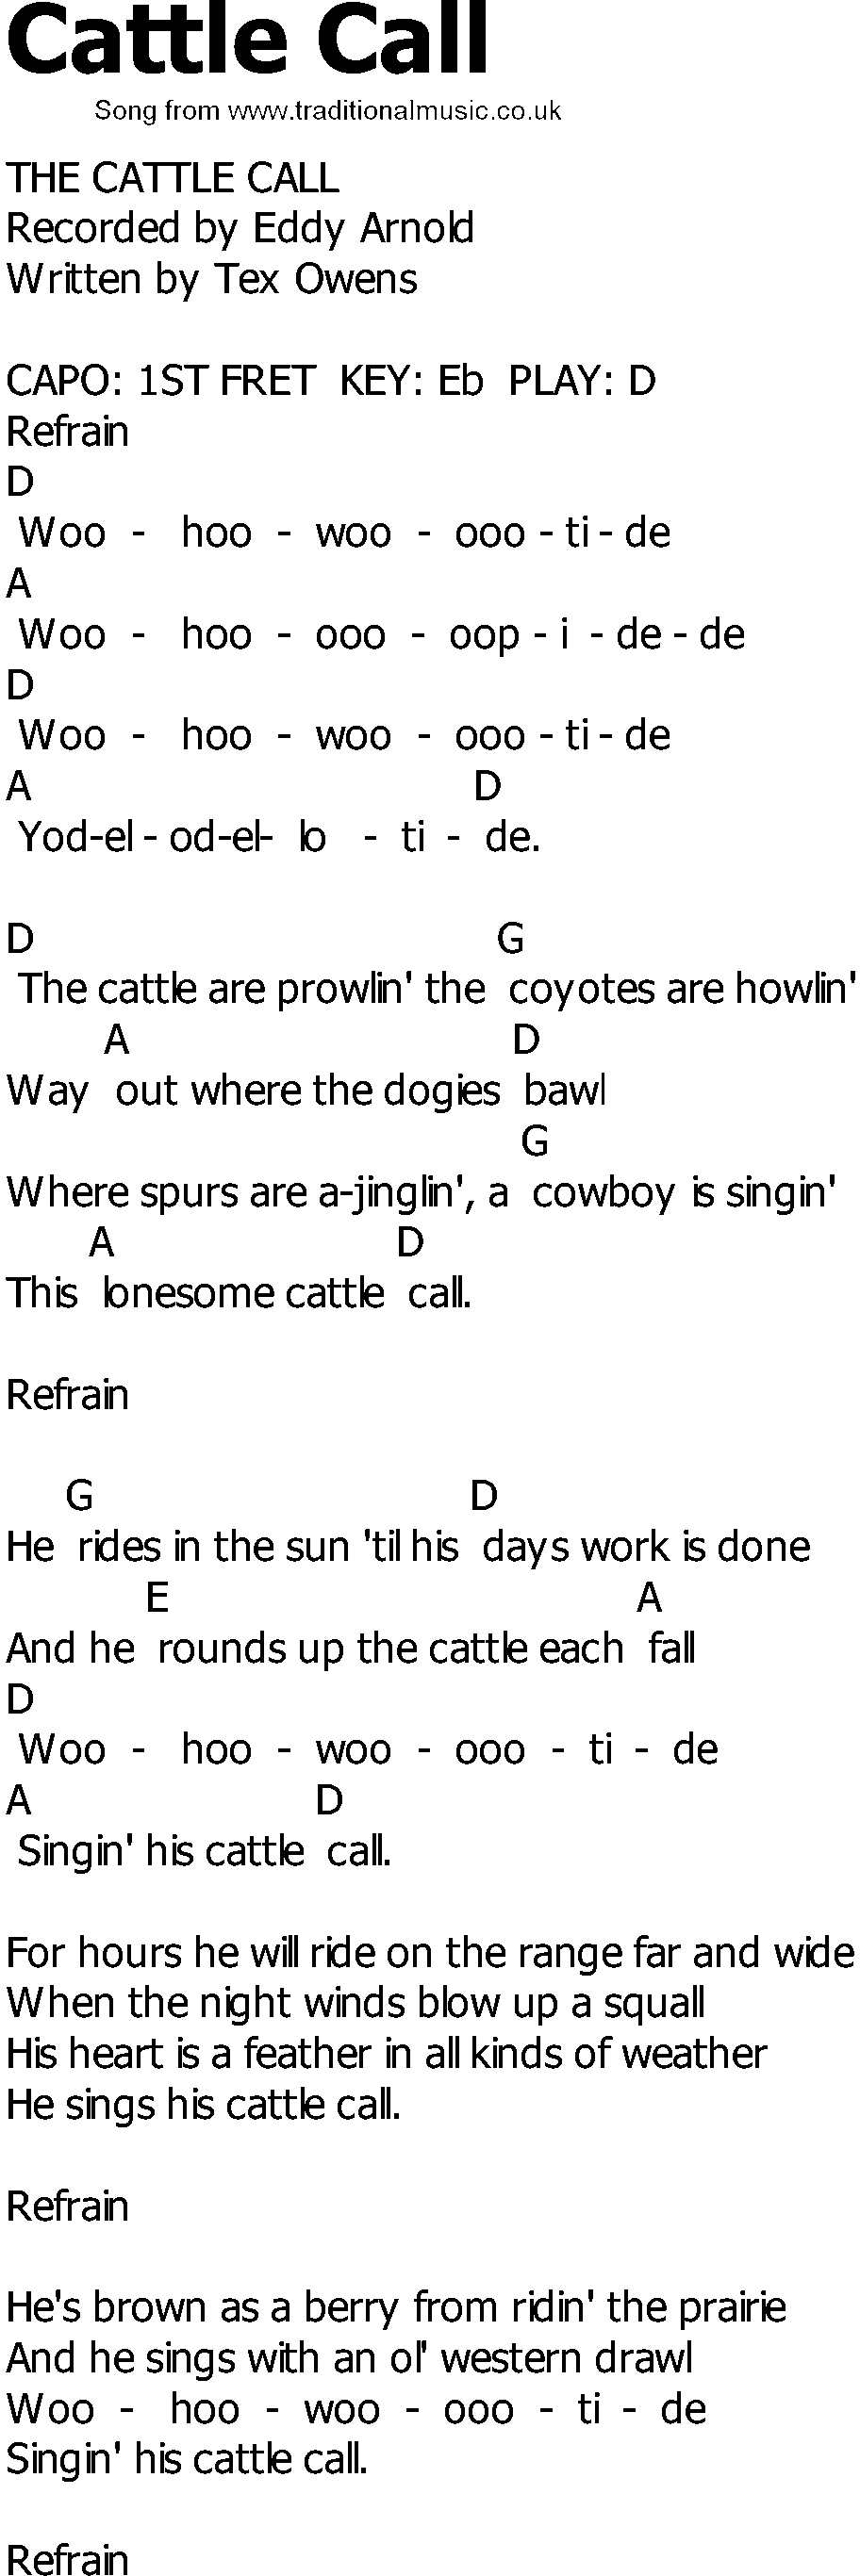 Old Country song lyrics with chords - Cattle Call